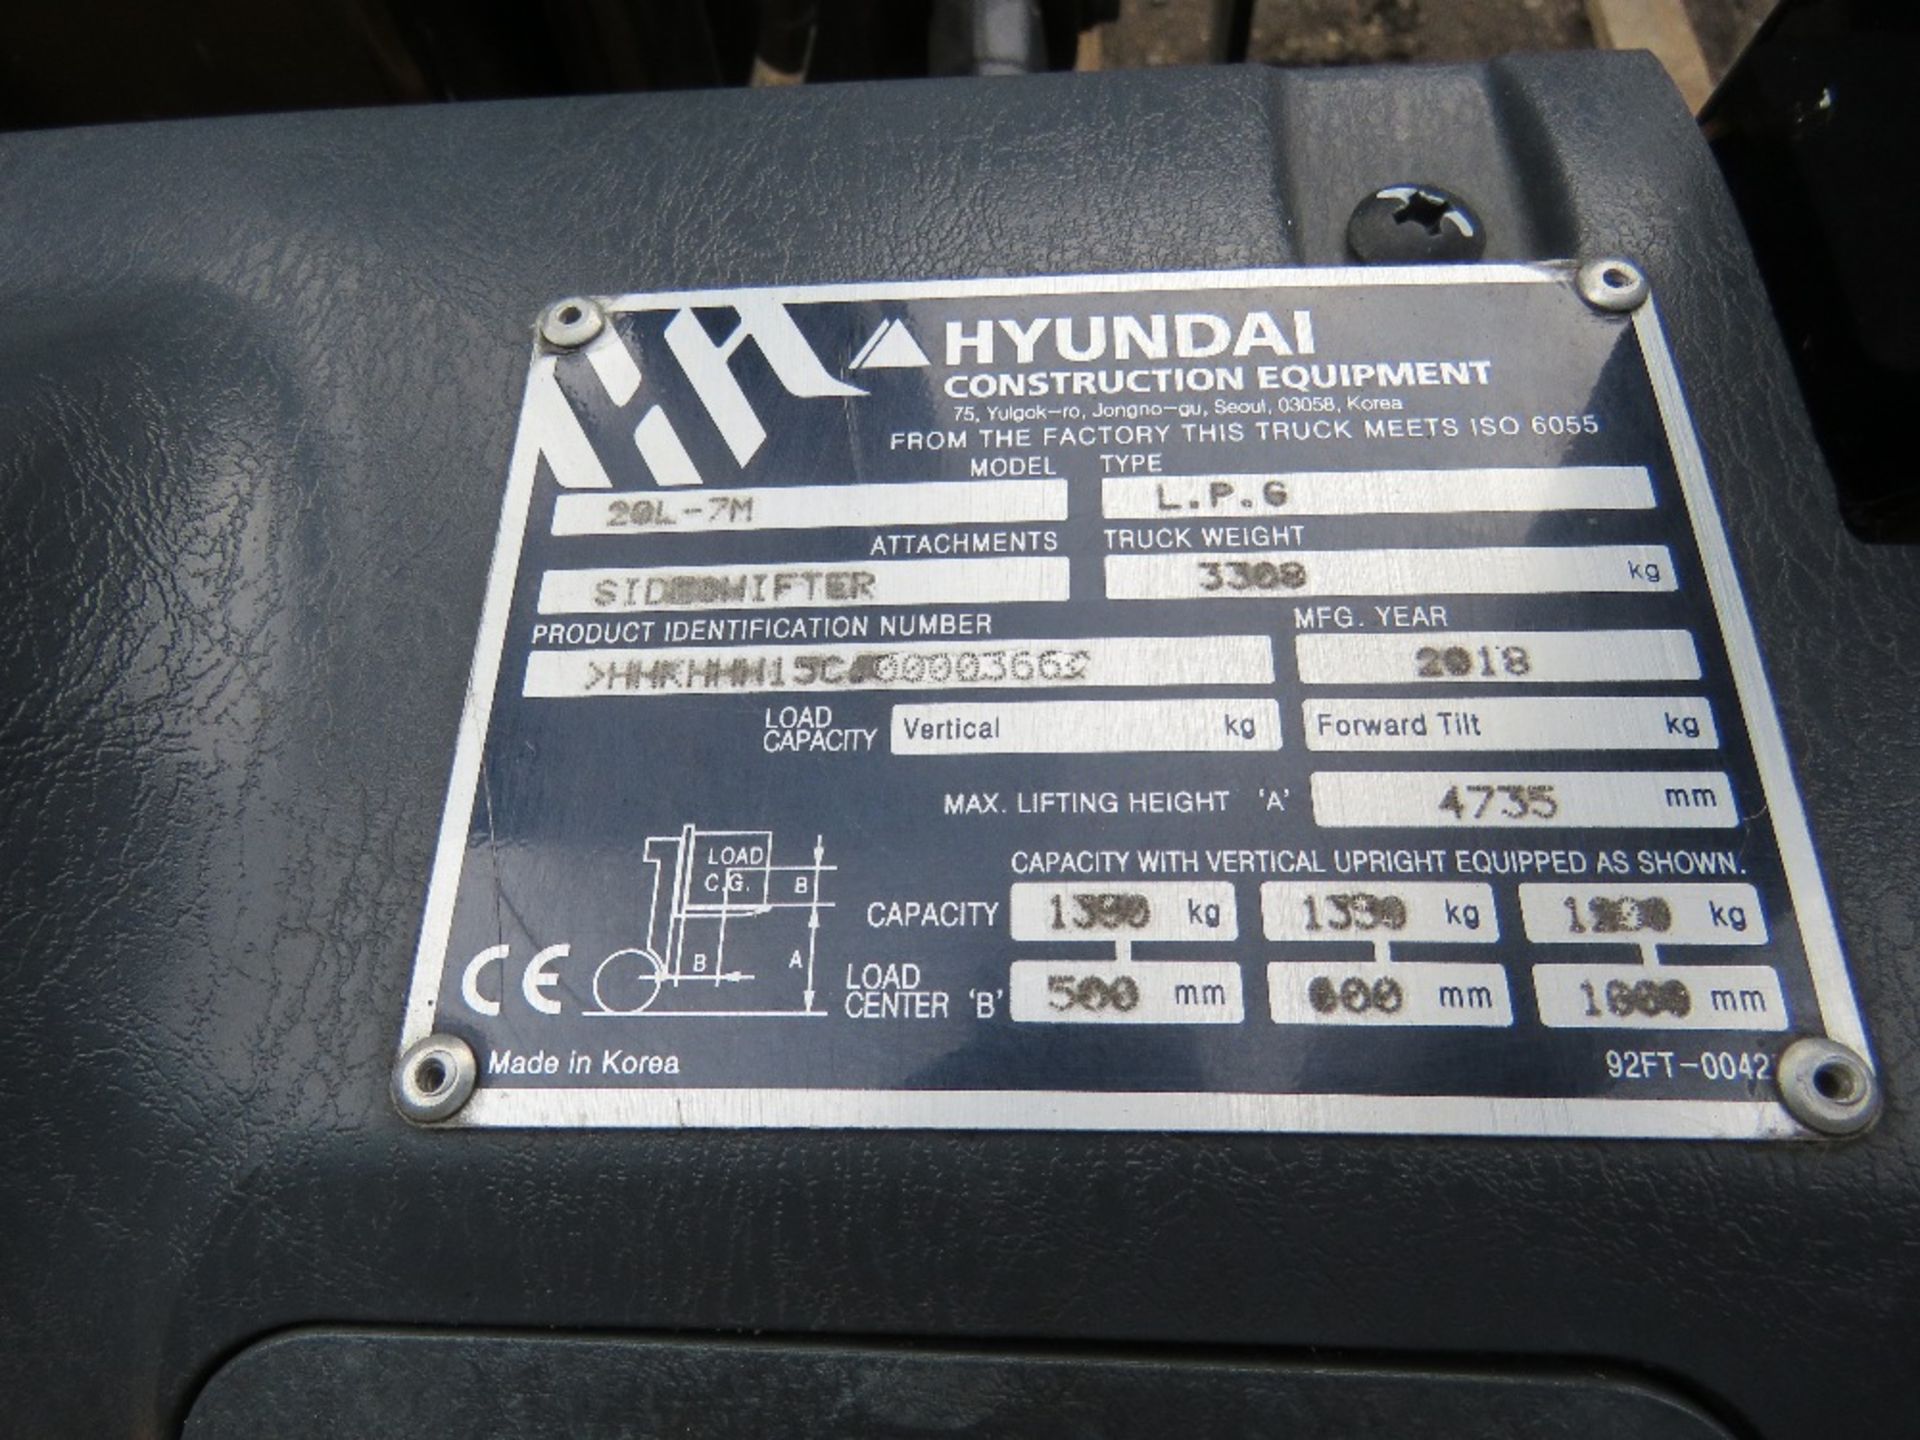 HYUNDAI 20L-7M GAS POWERED FORKLIFT TRUCK, YEAR 2018. 1600 REC HOURS APPROX. EXTRA SERVICE. - Image 9 of 11